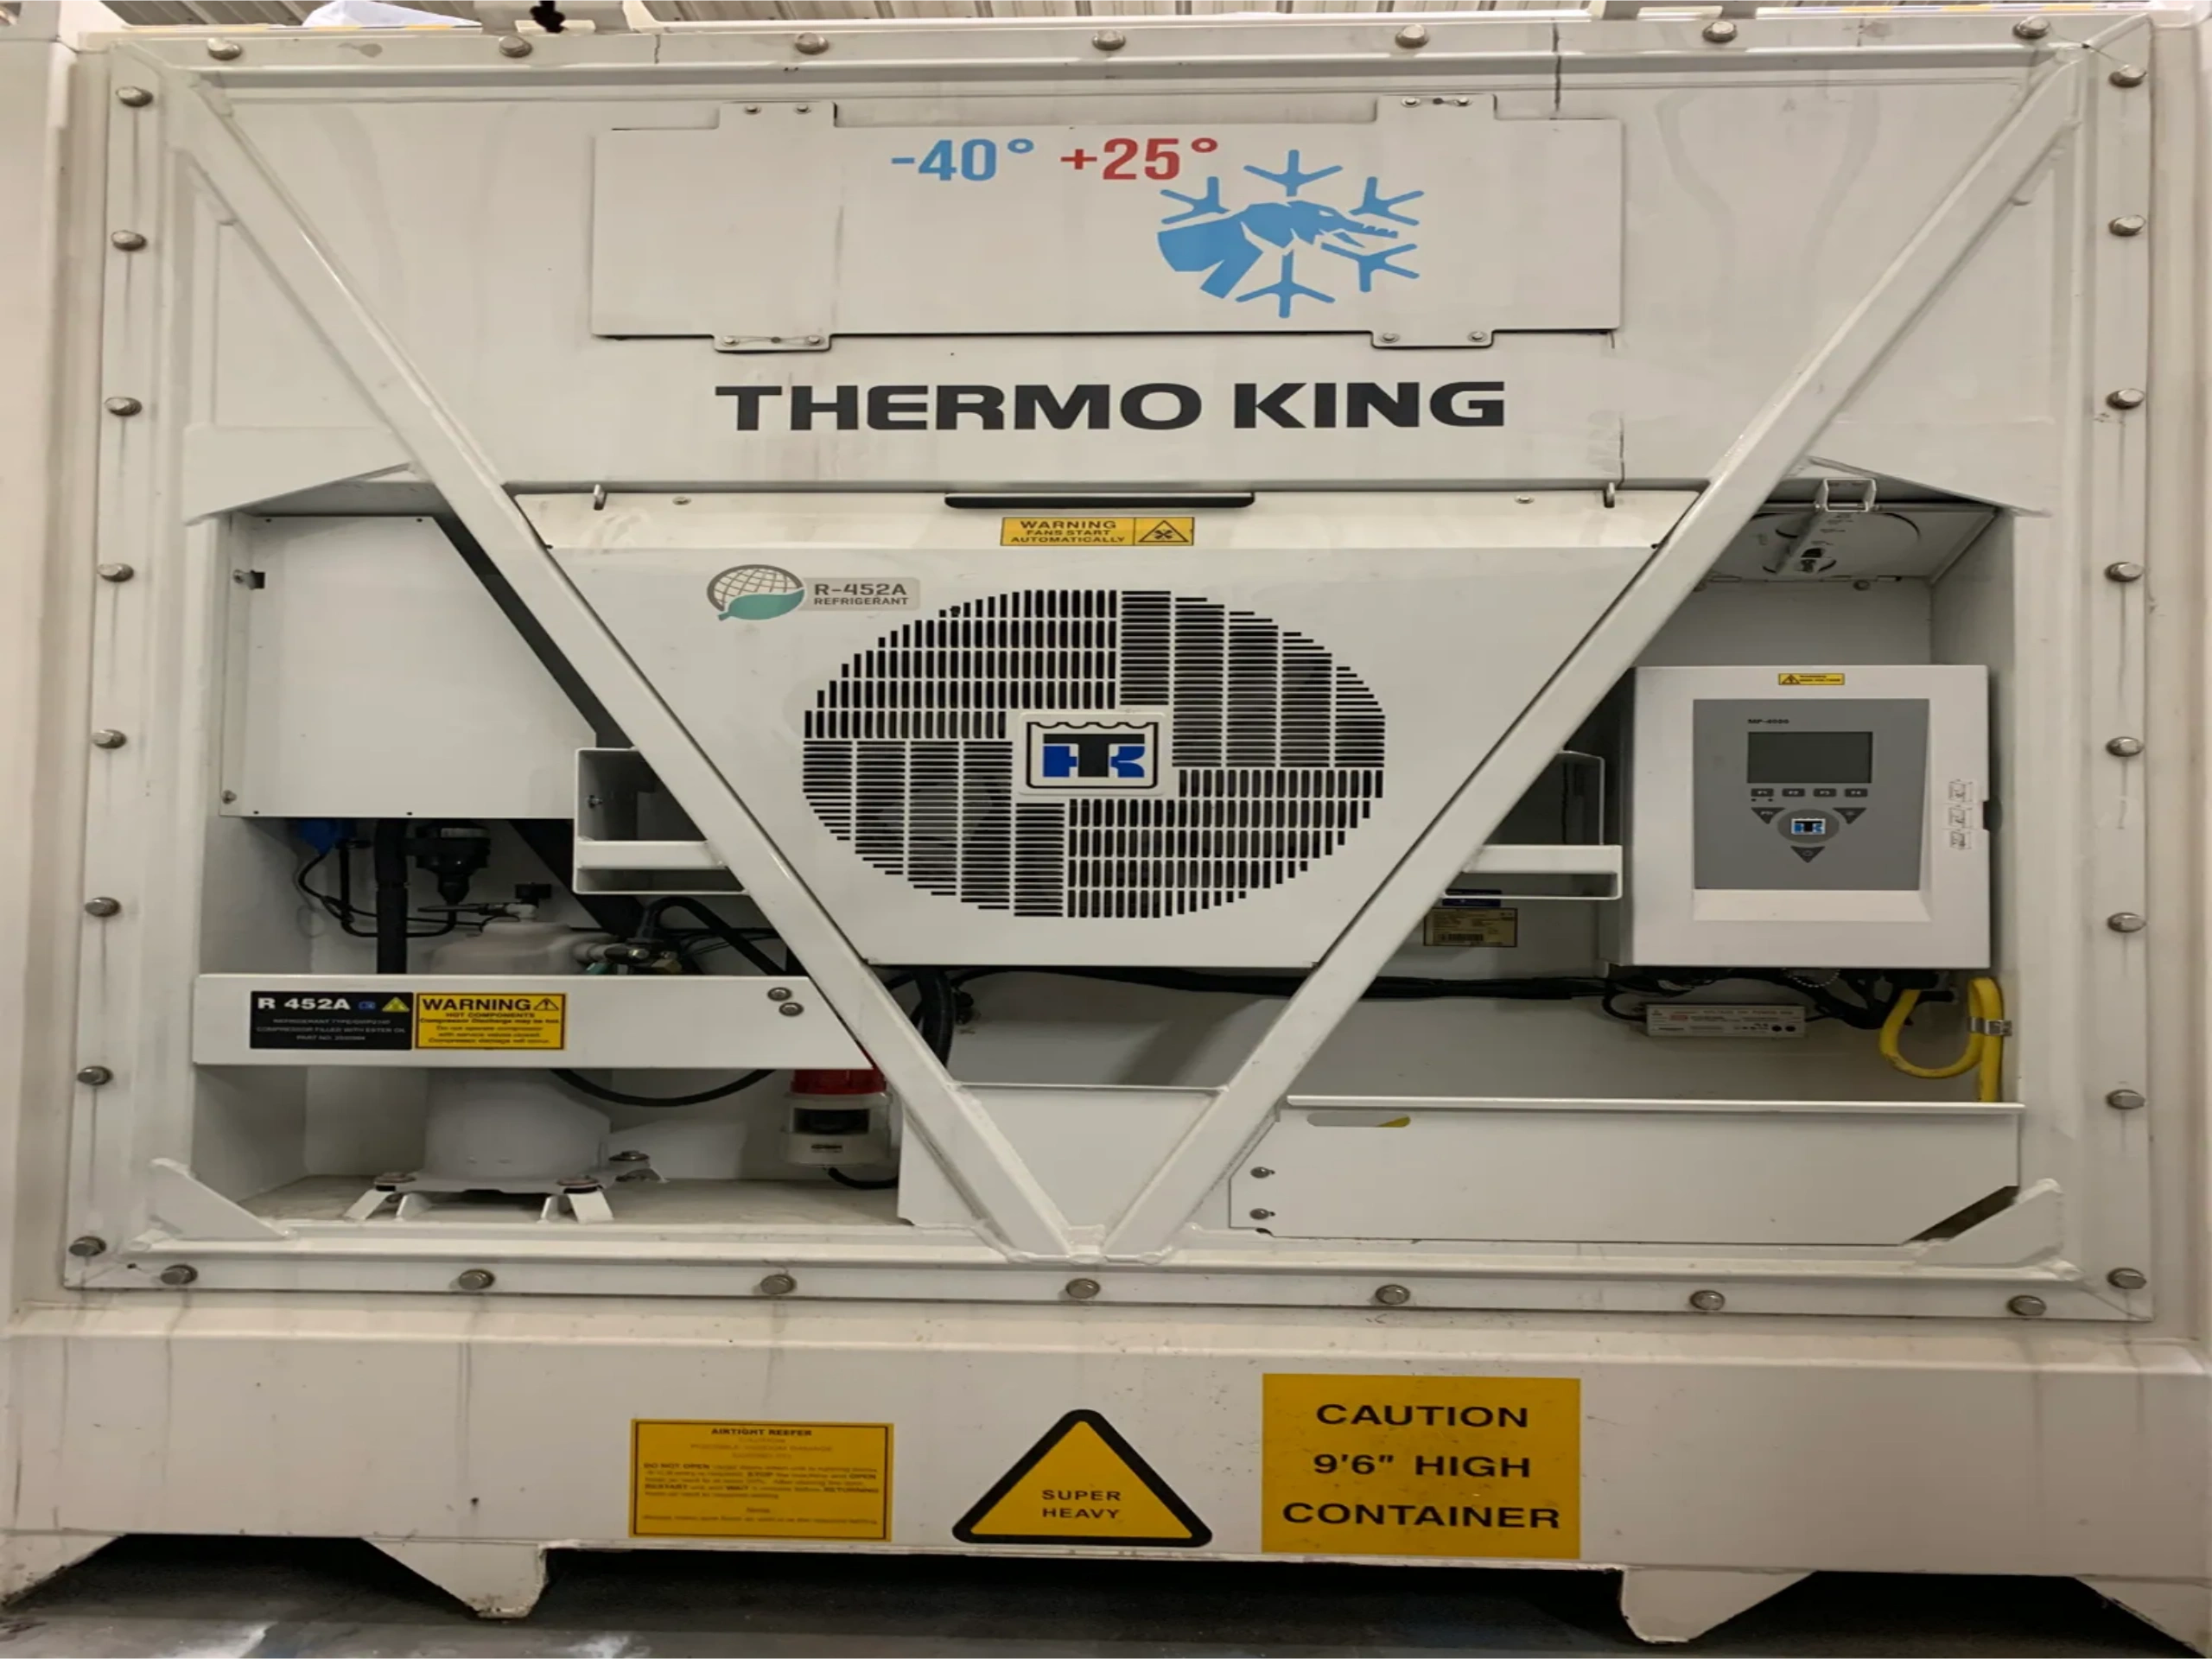 New and used reefe containers Sales and Rental
Thermo King  |  Carrier  |  Daikin + 


Toronto | Van